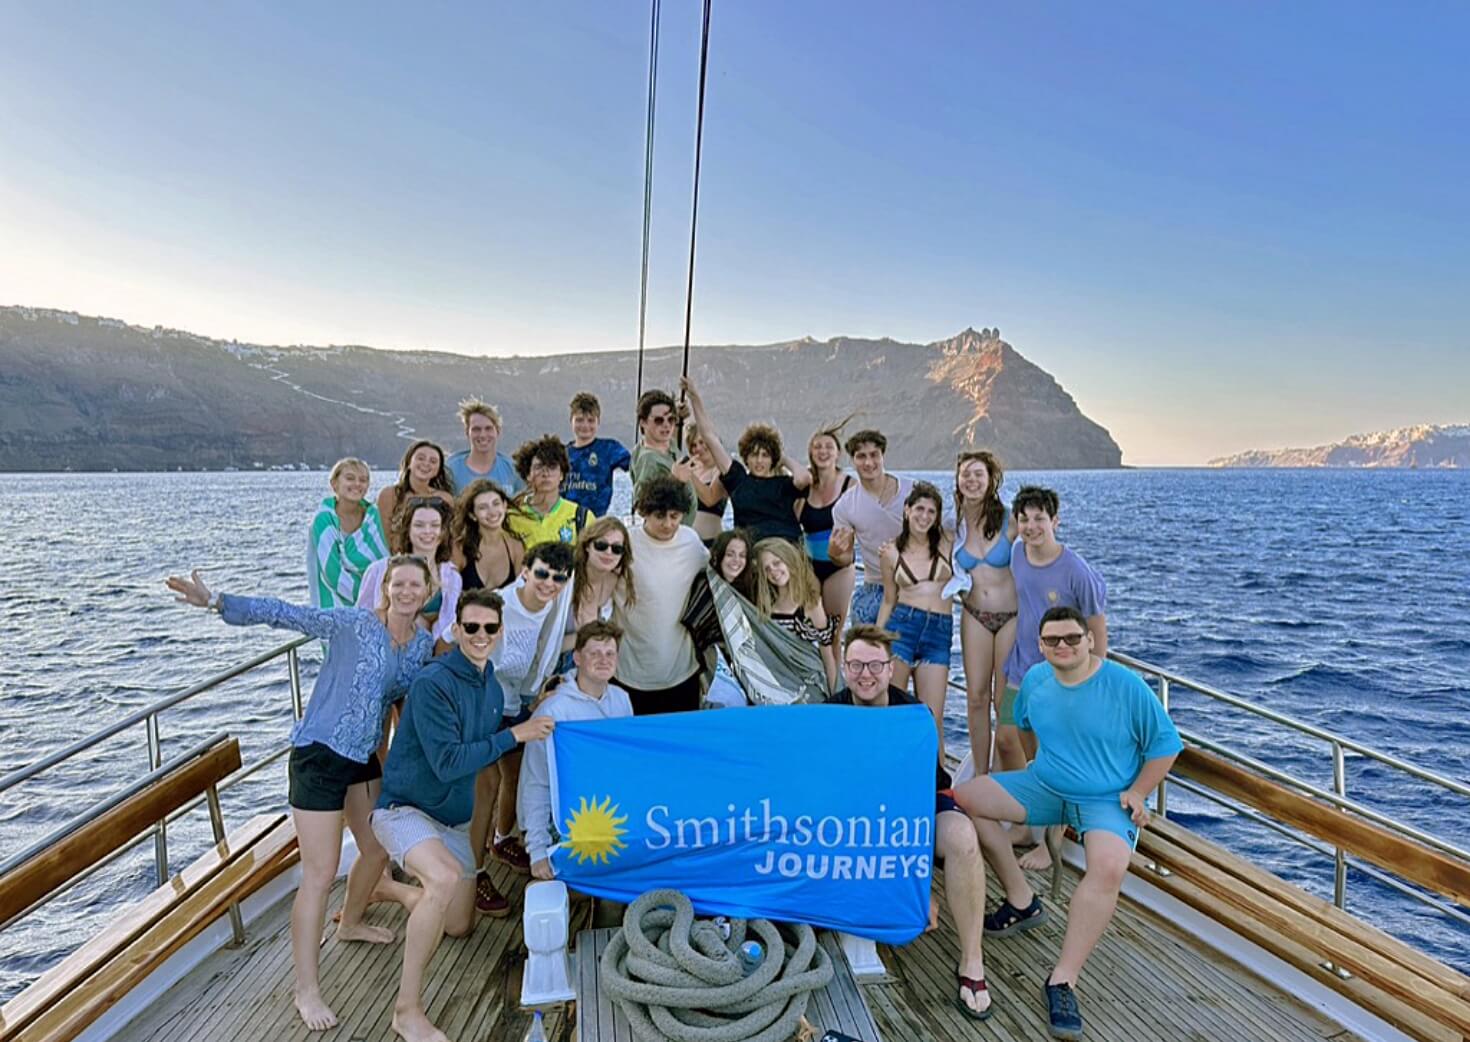 Students holding Smithsonian Journeys flag while on a boat